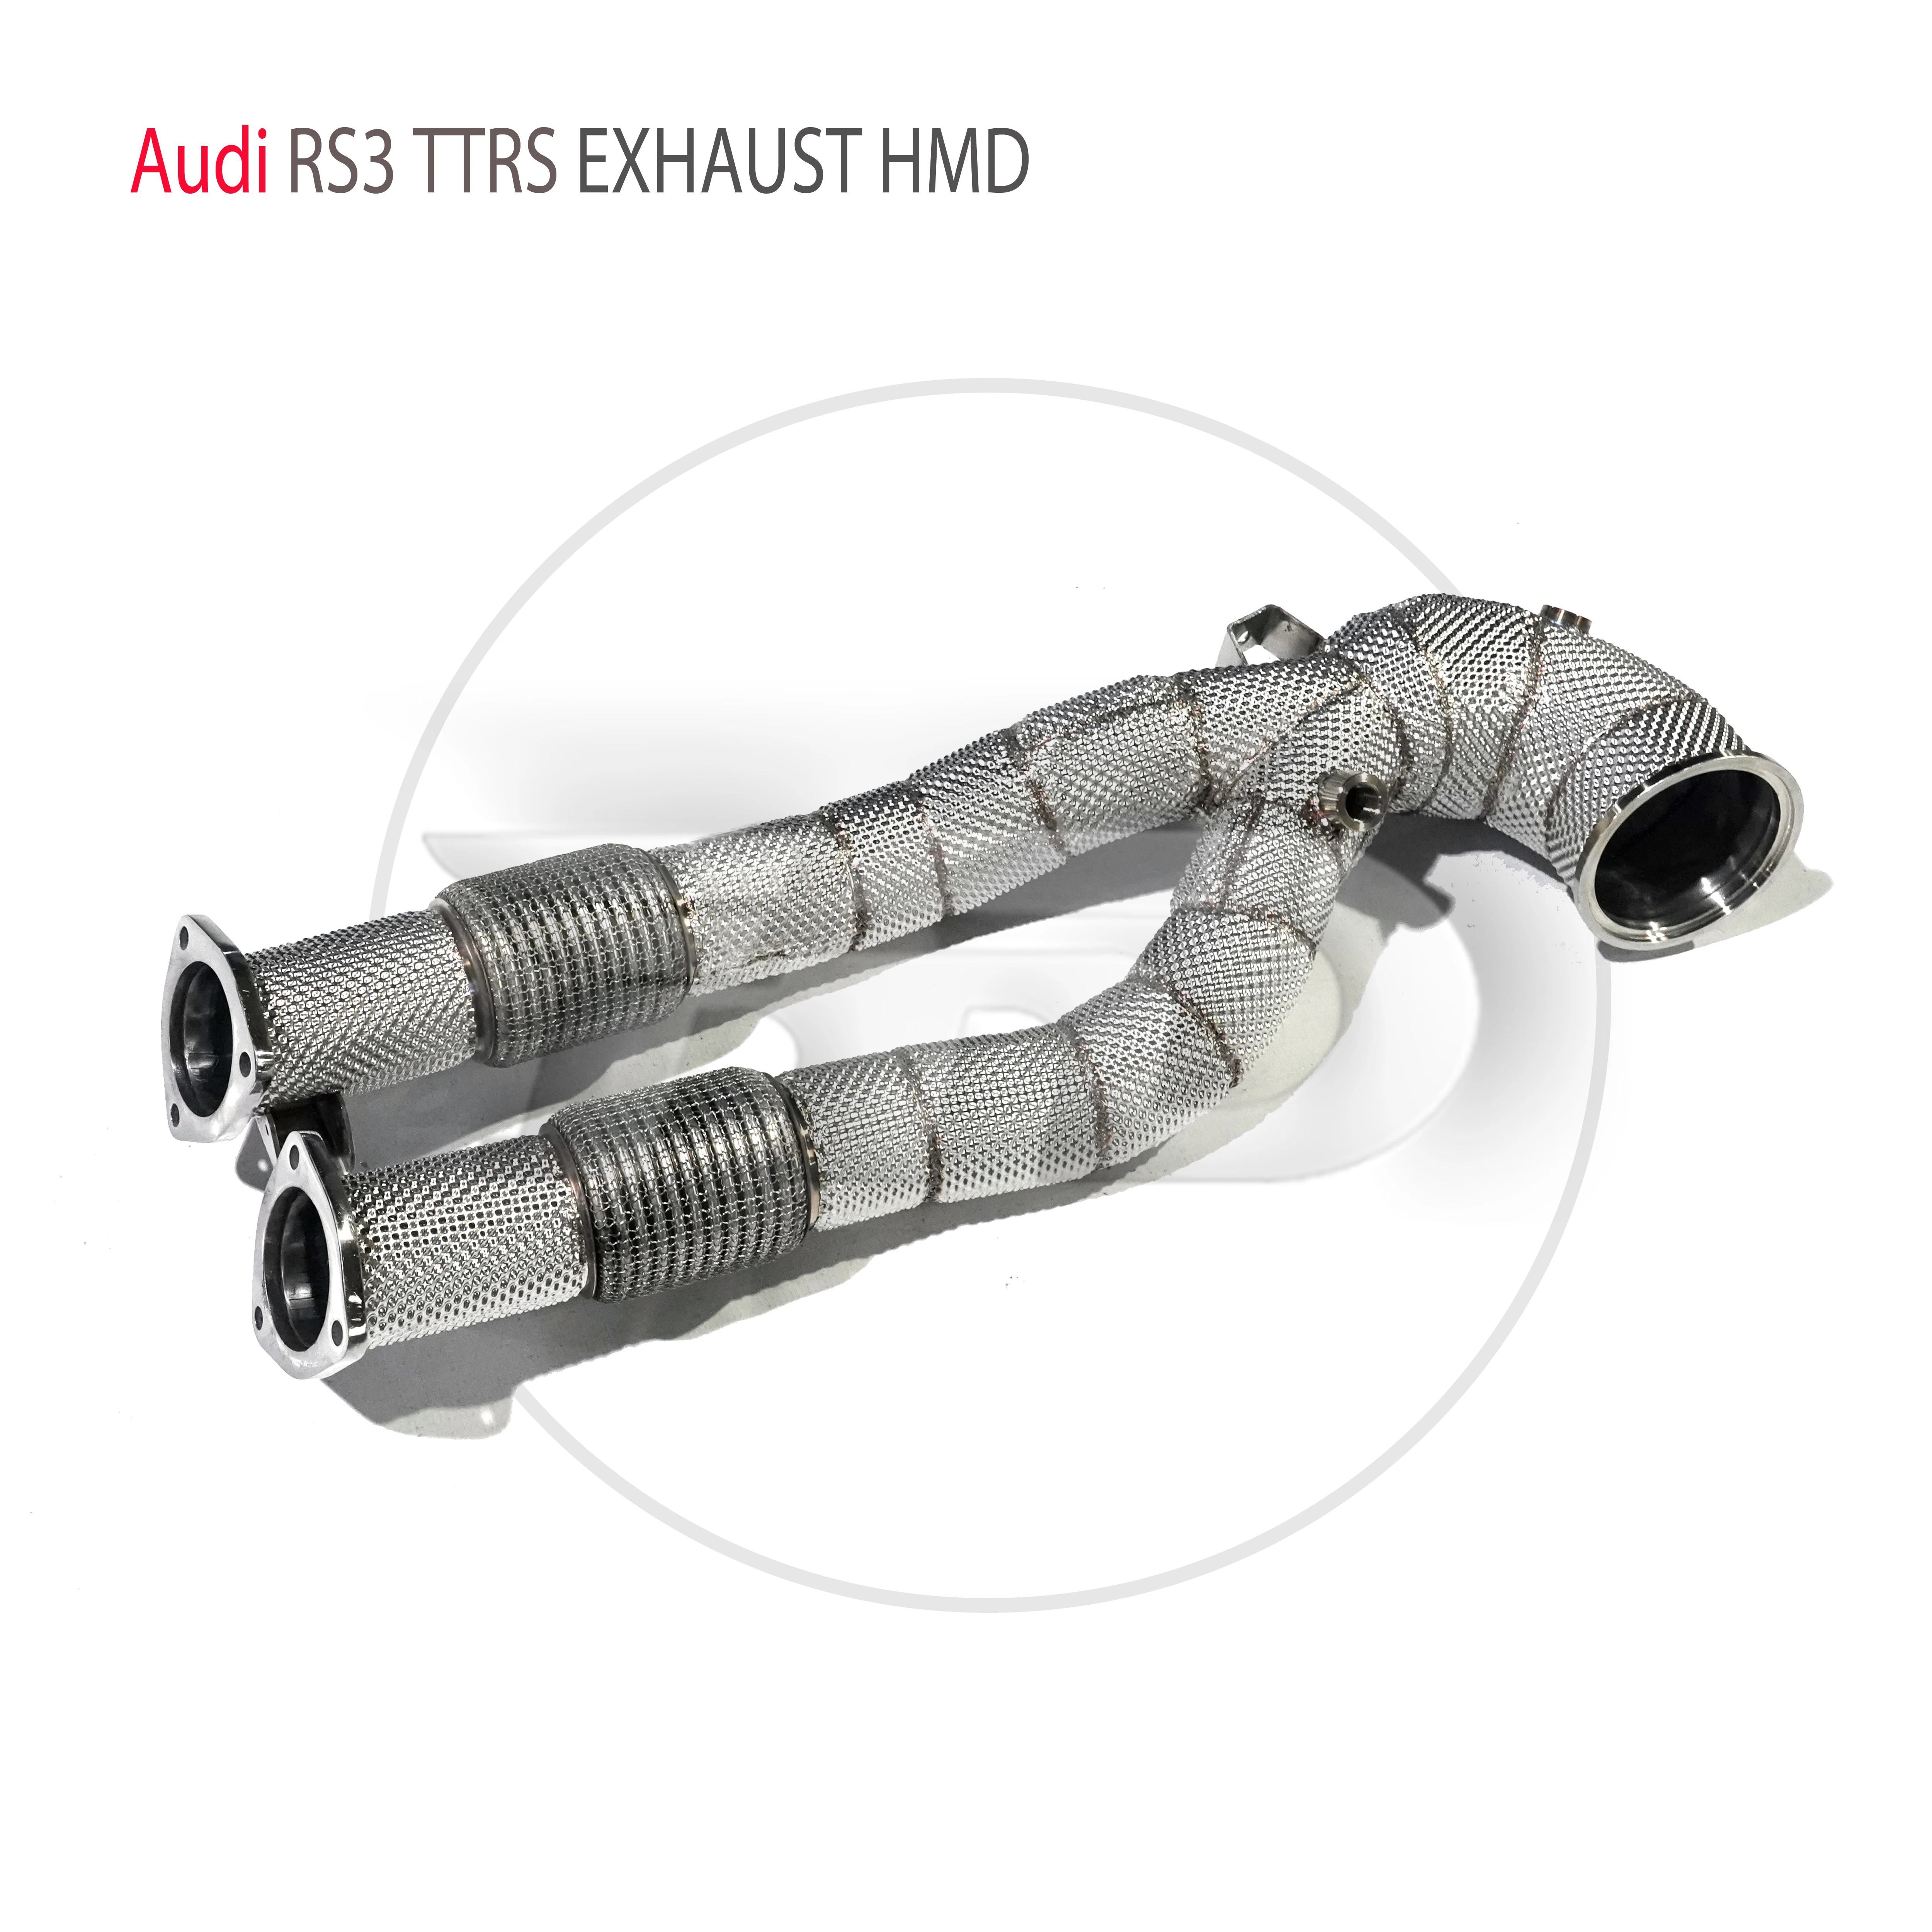 

HMD Exhaust Manifold High Flow Downpipe for Audi RS3 TTRS Car Accessories With Catalytic Header Without Cat Catless Pipe